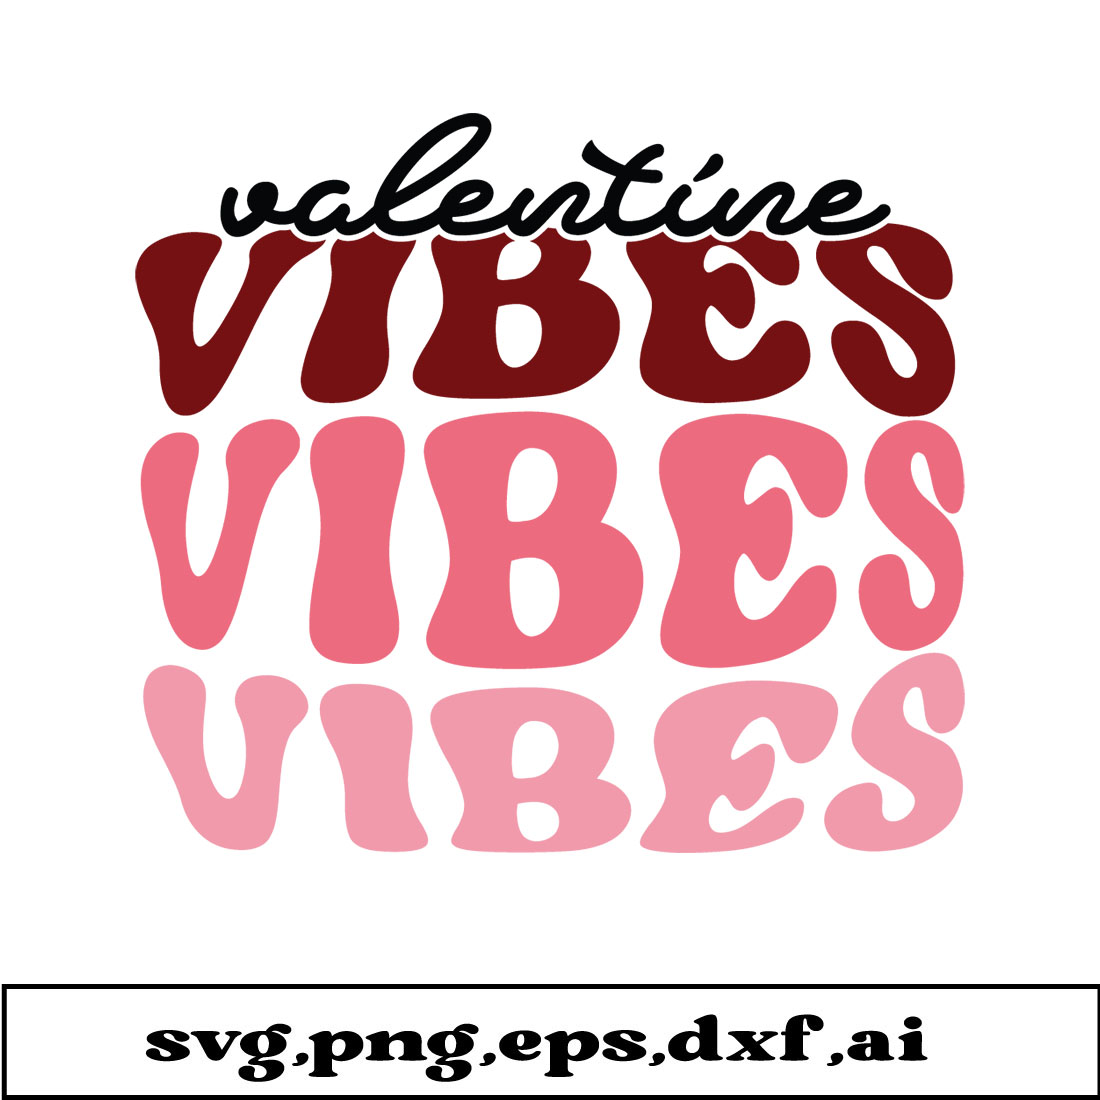 Image with adorable Valentine Vibes lettering